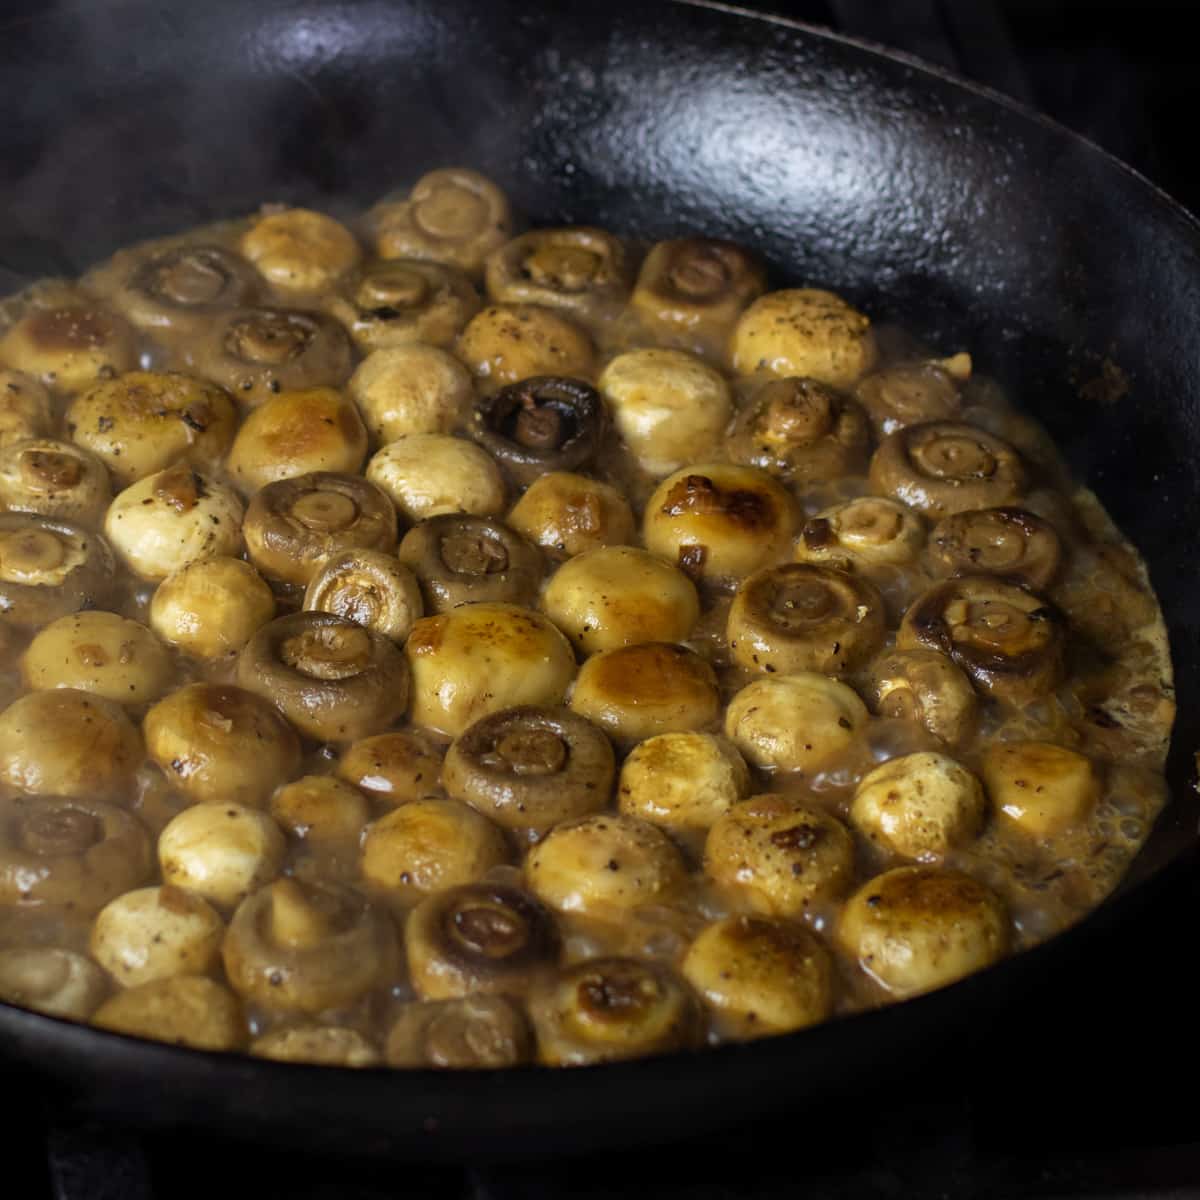 Mushrooms slowing cooking with broth.